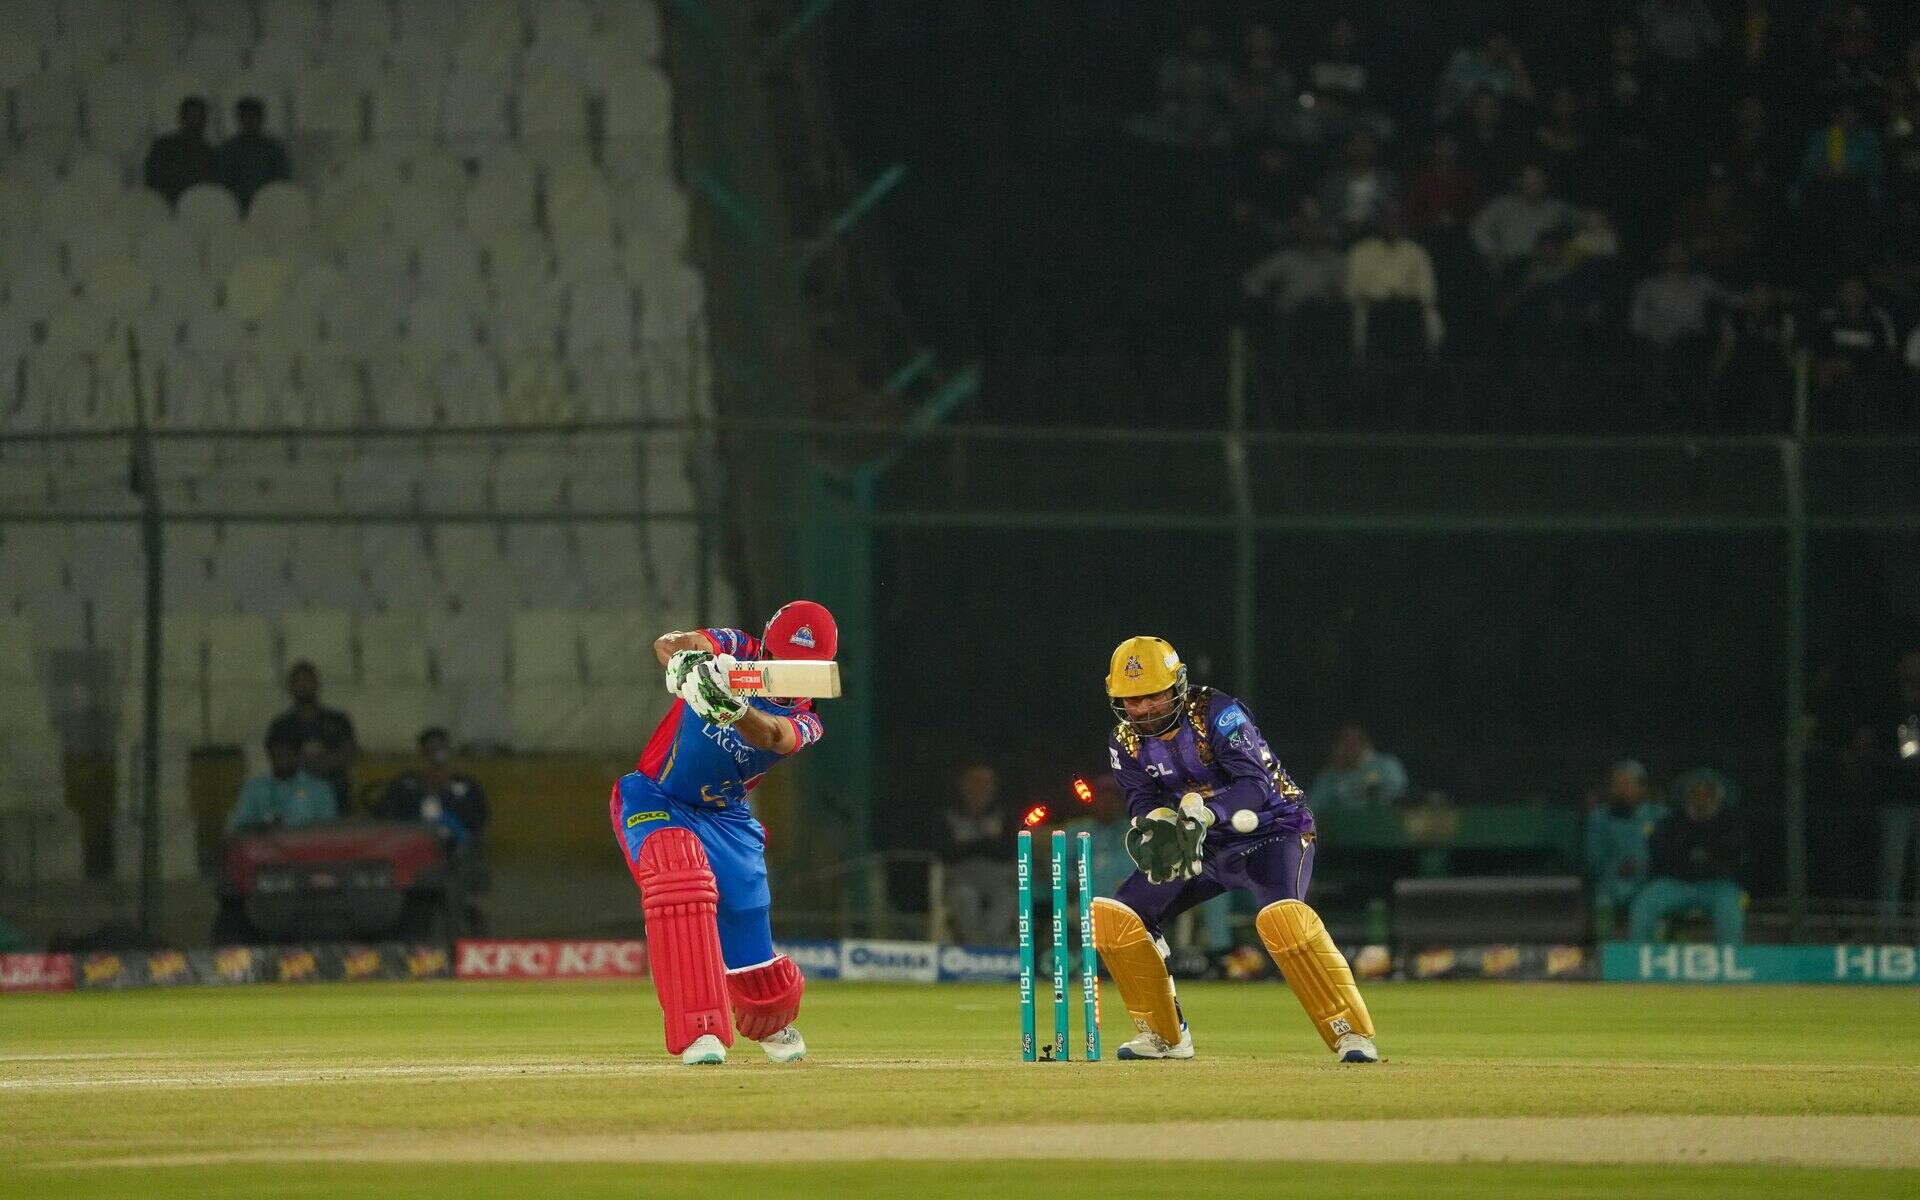 Shan Masood gets his stumps knocked over by Akeal Hosein (Source: X.com)